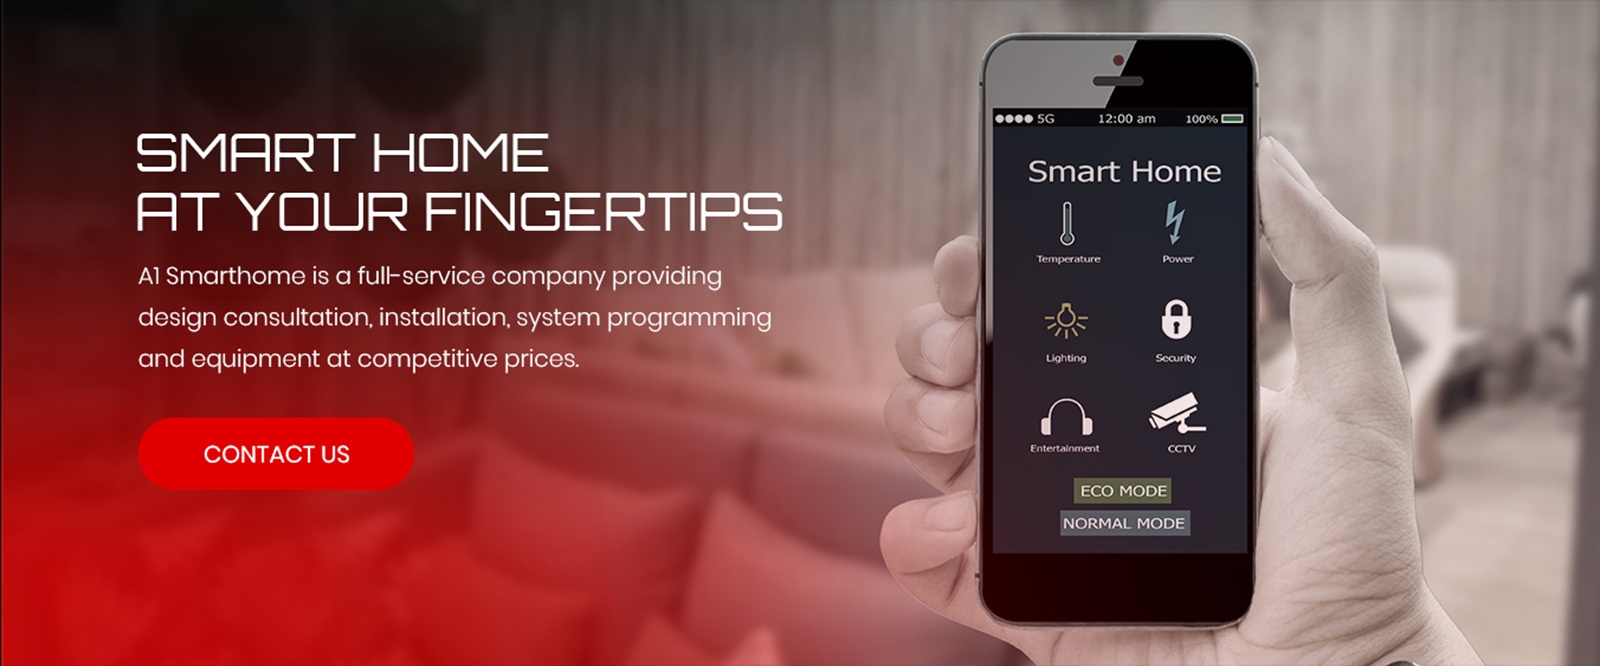 Smart Home at your fingertips